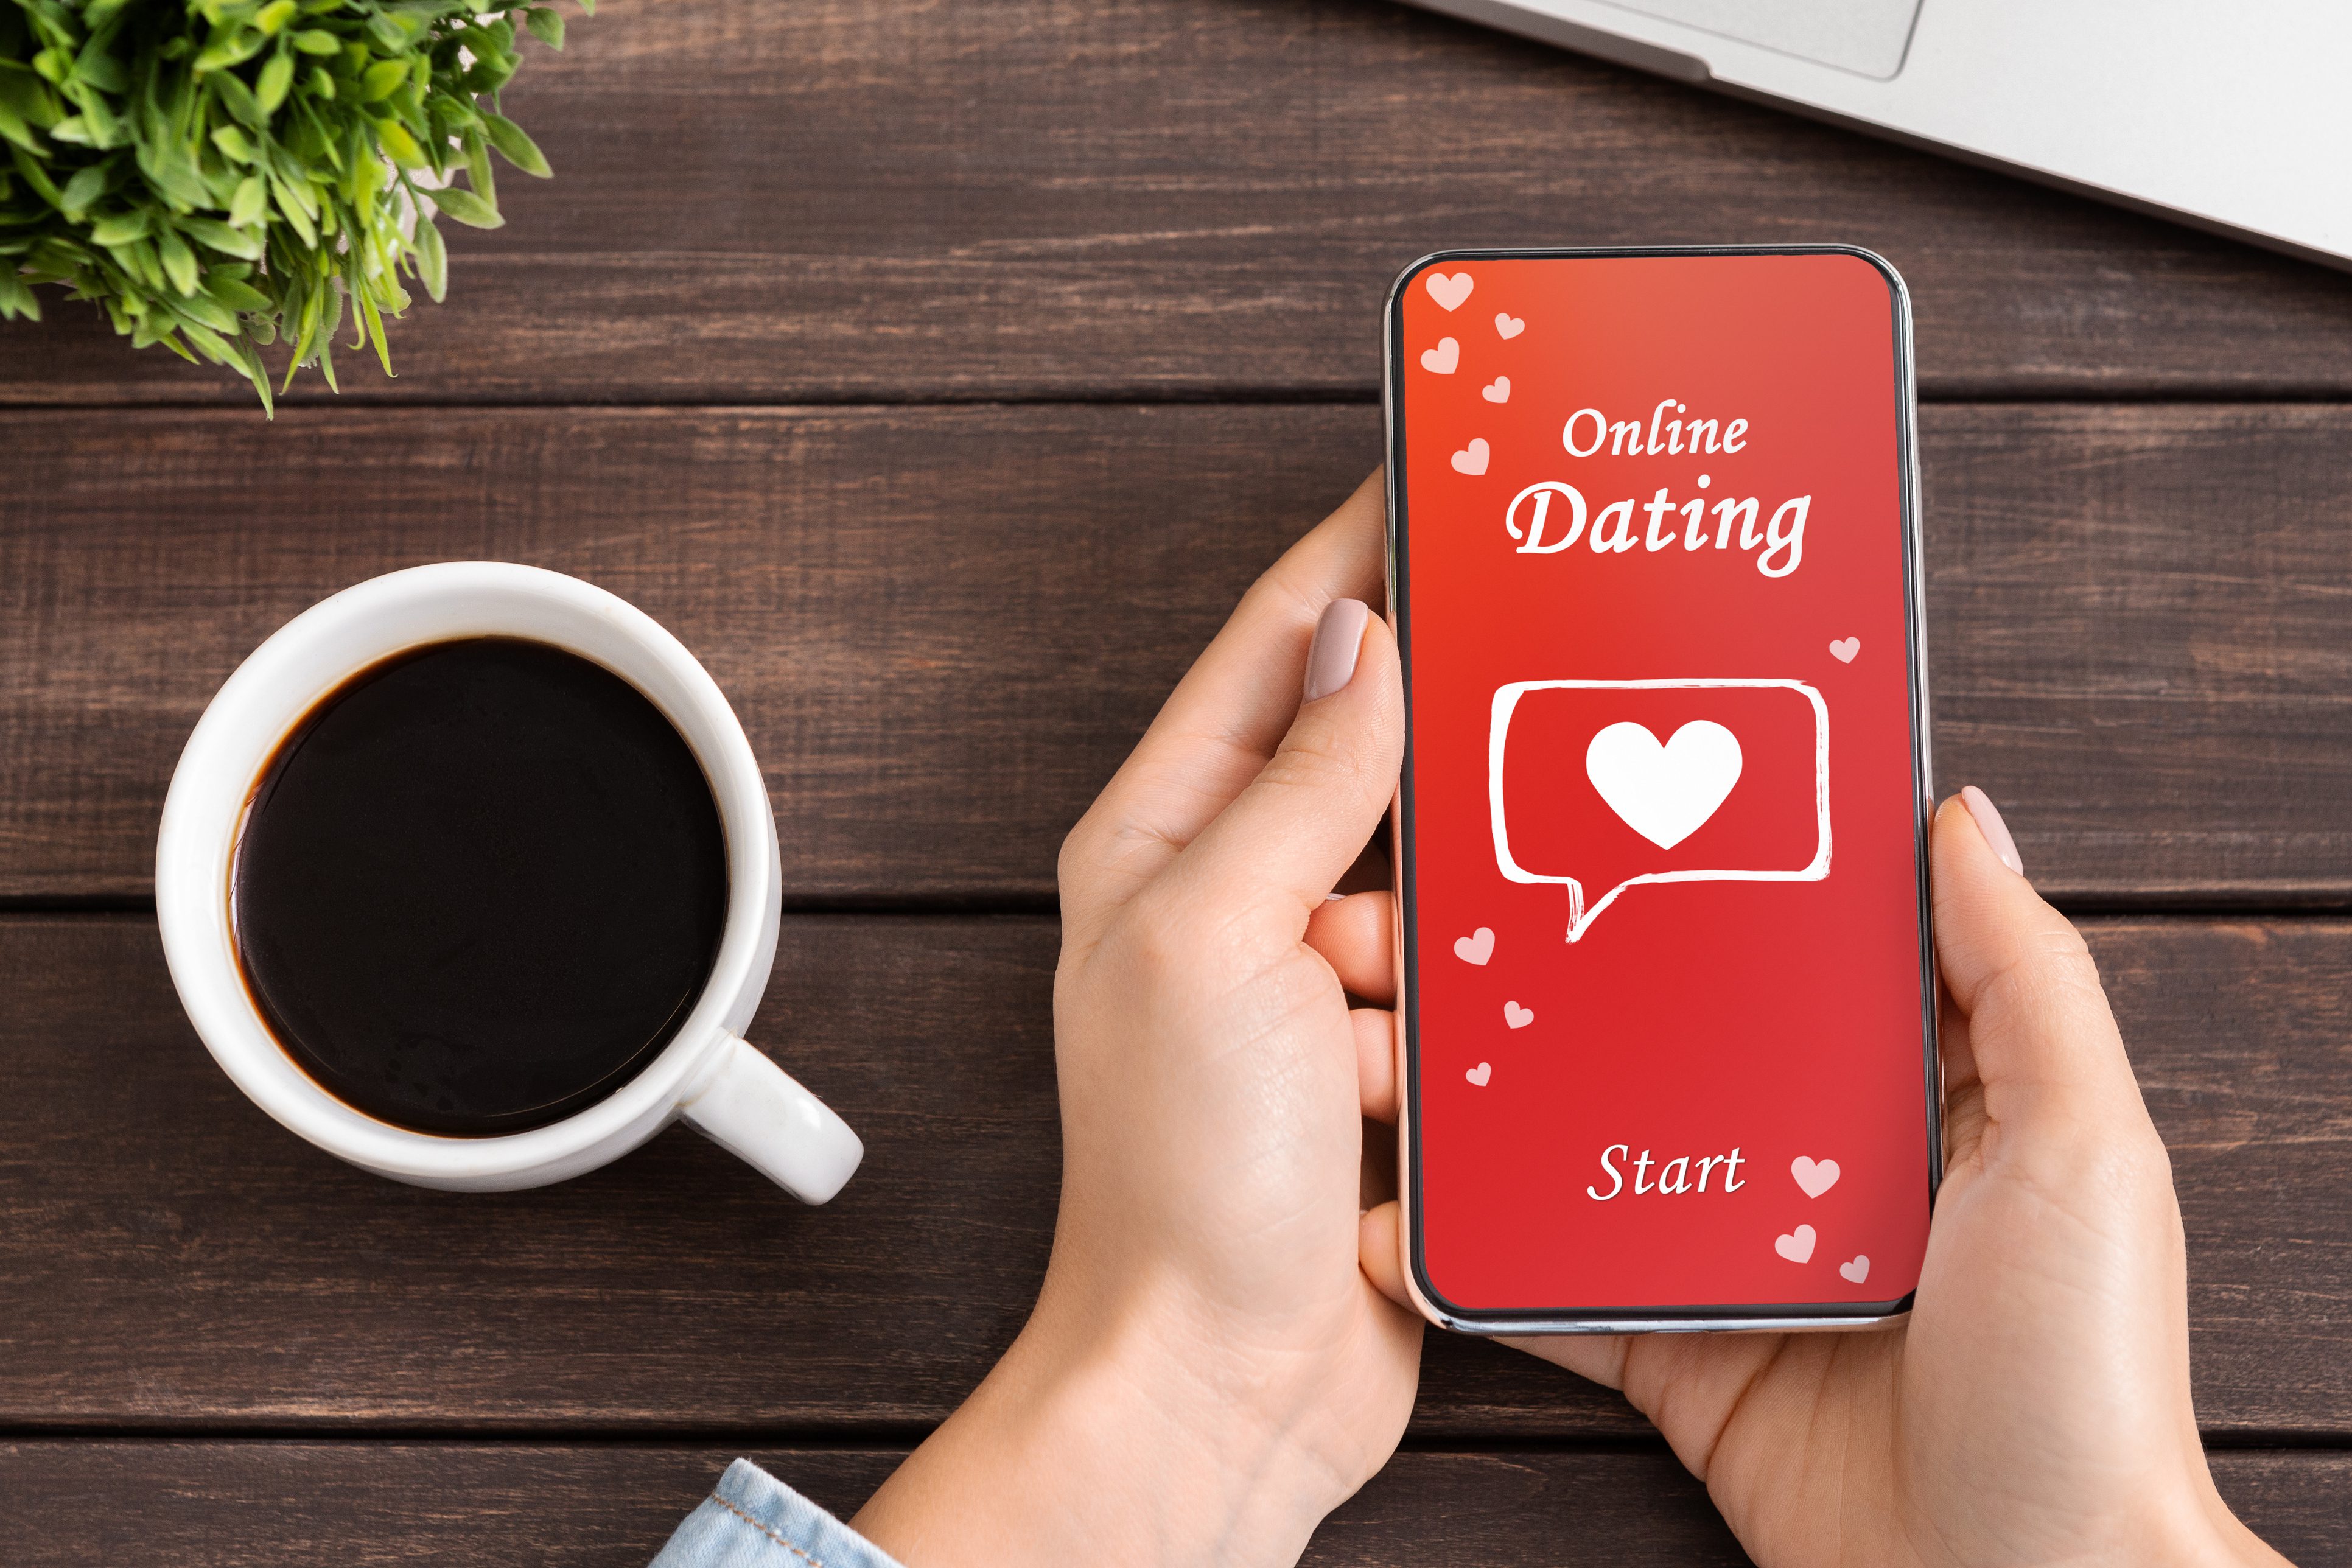 When To Start Online Dating?